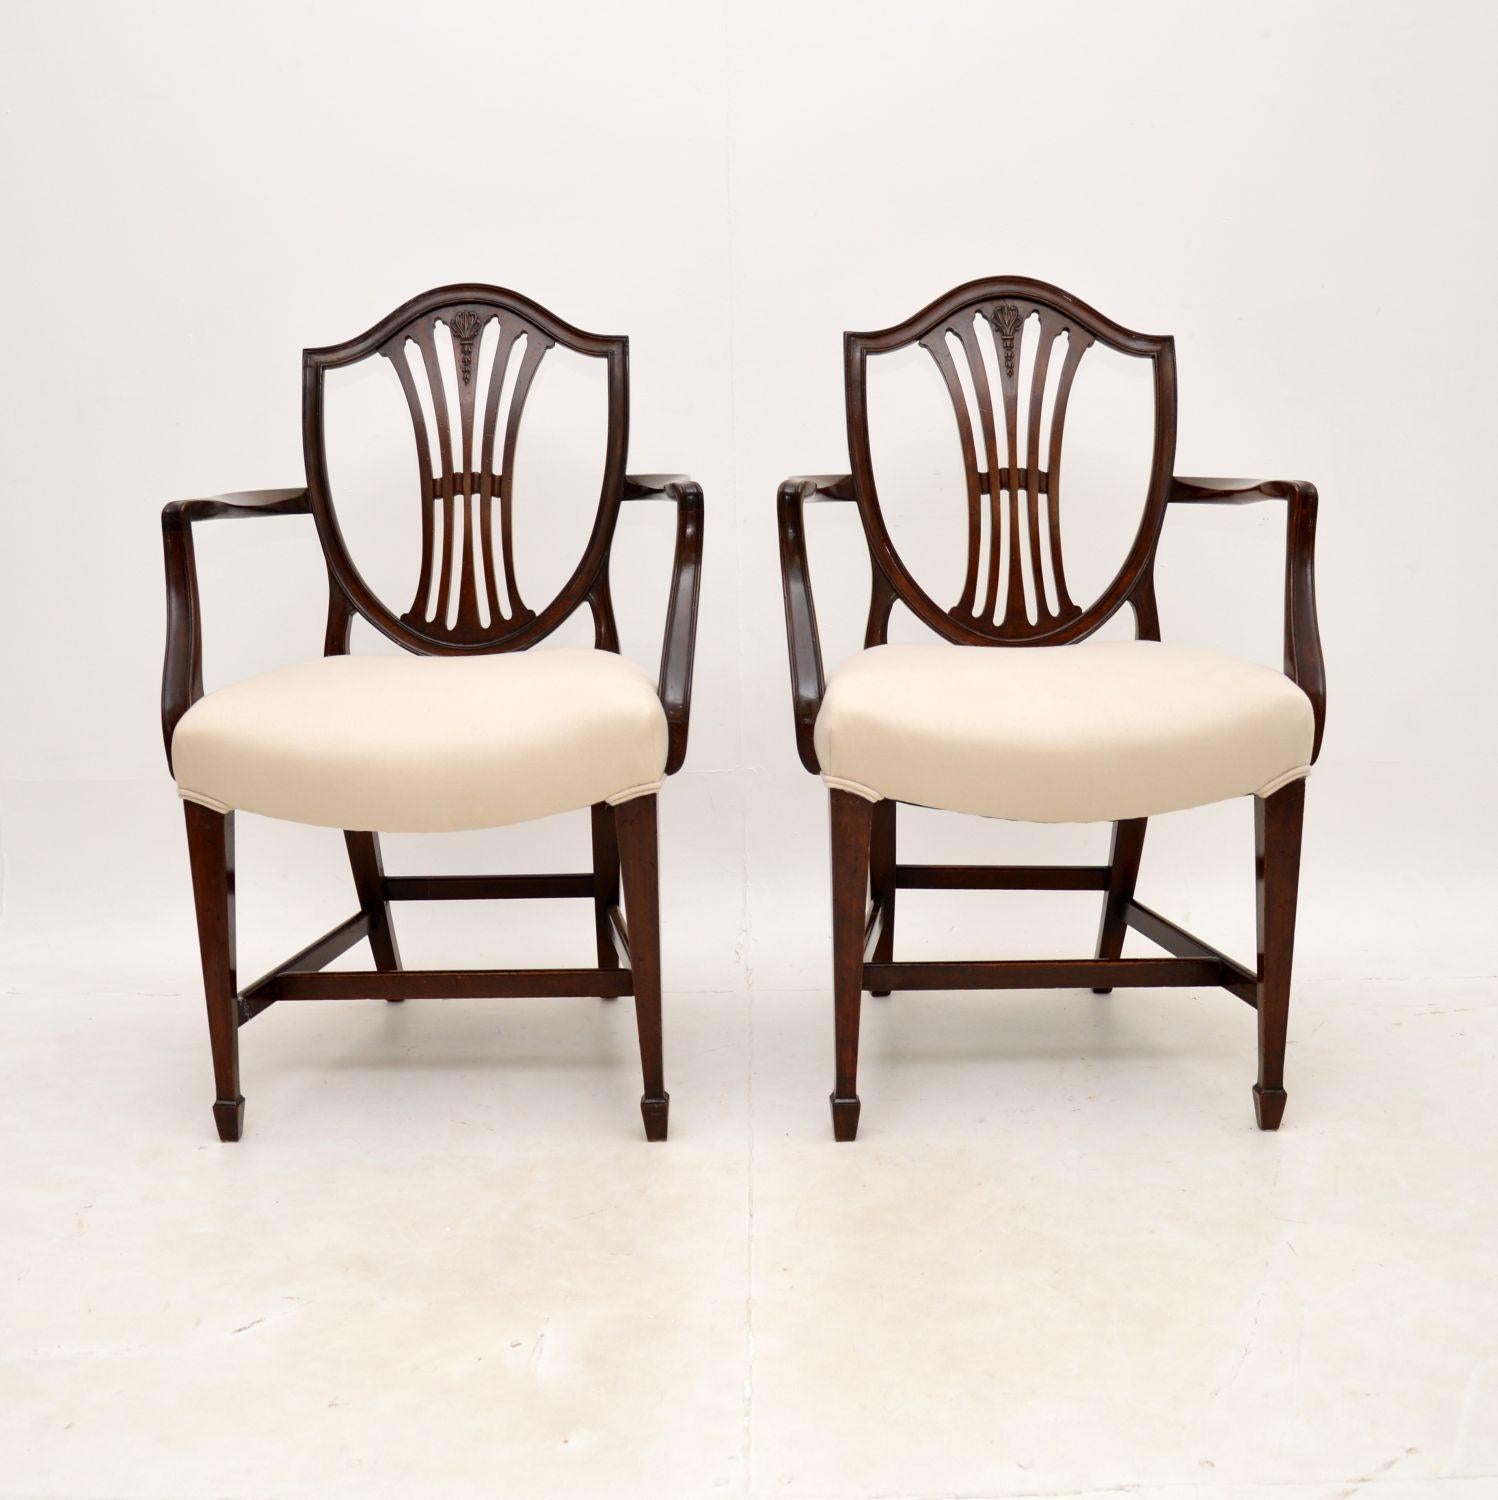 A fine pair of antique Georgian style carver armchairs. They were made in England, we would date these from around the 1900-1910 period.

They are extremely well made and beautifully designed in the Hepplewhite style. The pierced shield backs have a